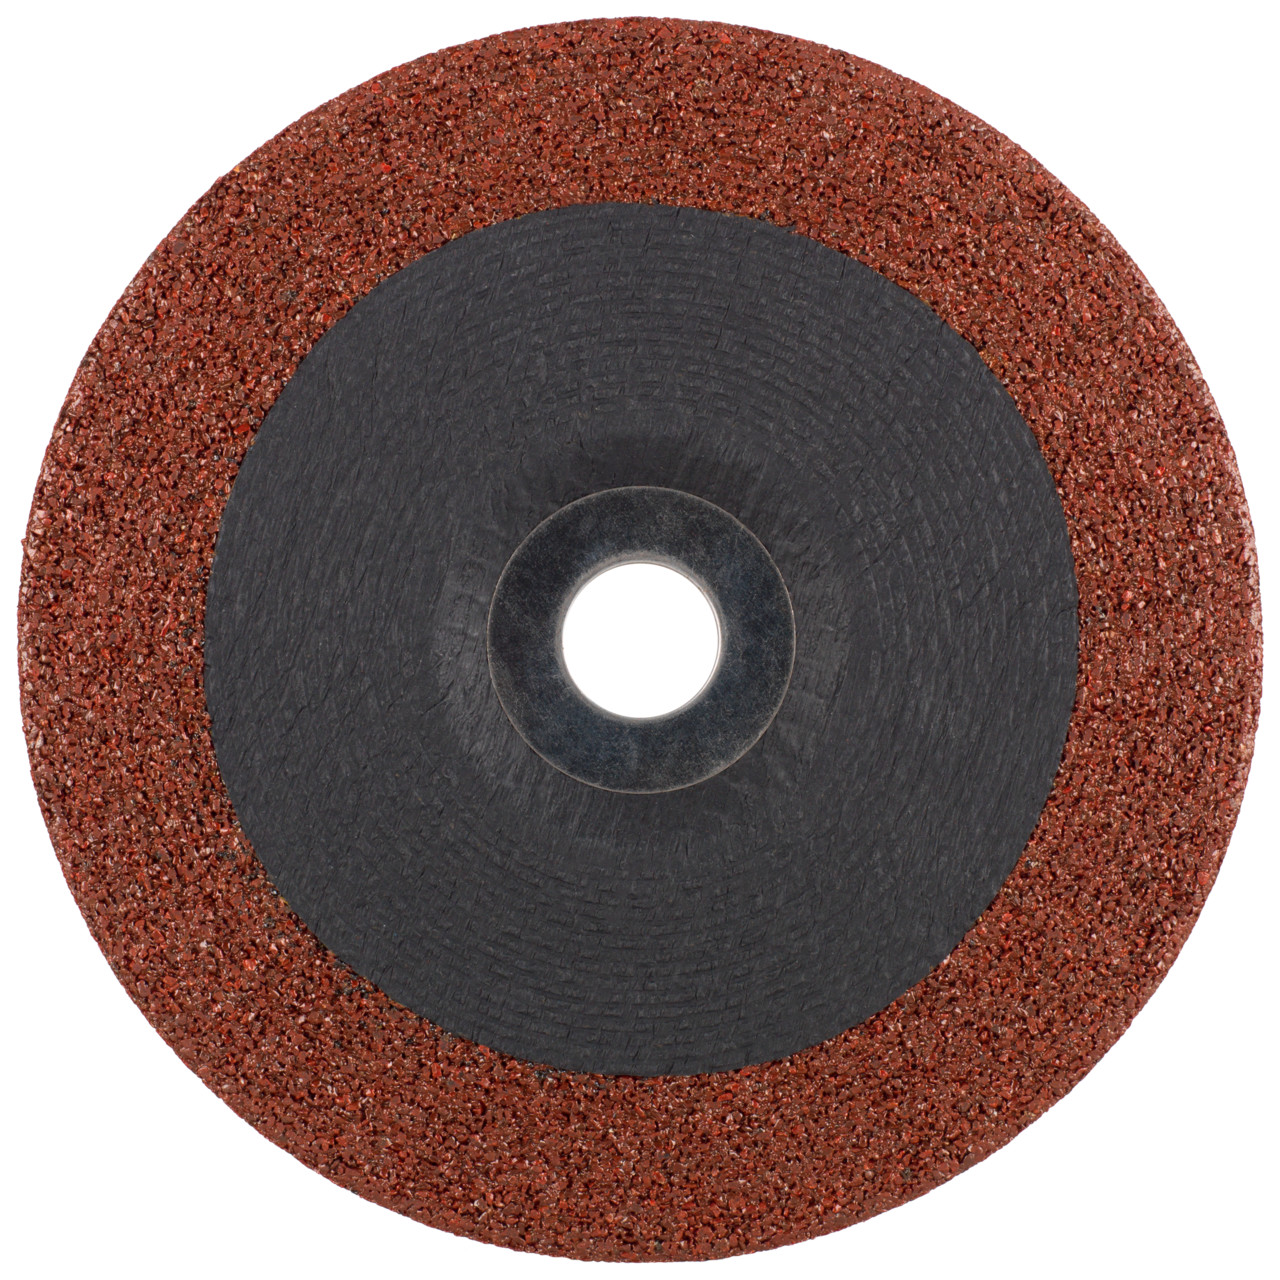 TYROLIT grinding wheel DxUxH 125x7x22.23 3in1 for steel and stainless steel and cast iron, shape: 27 - offset version, Art. 466749